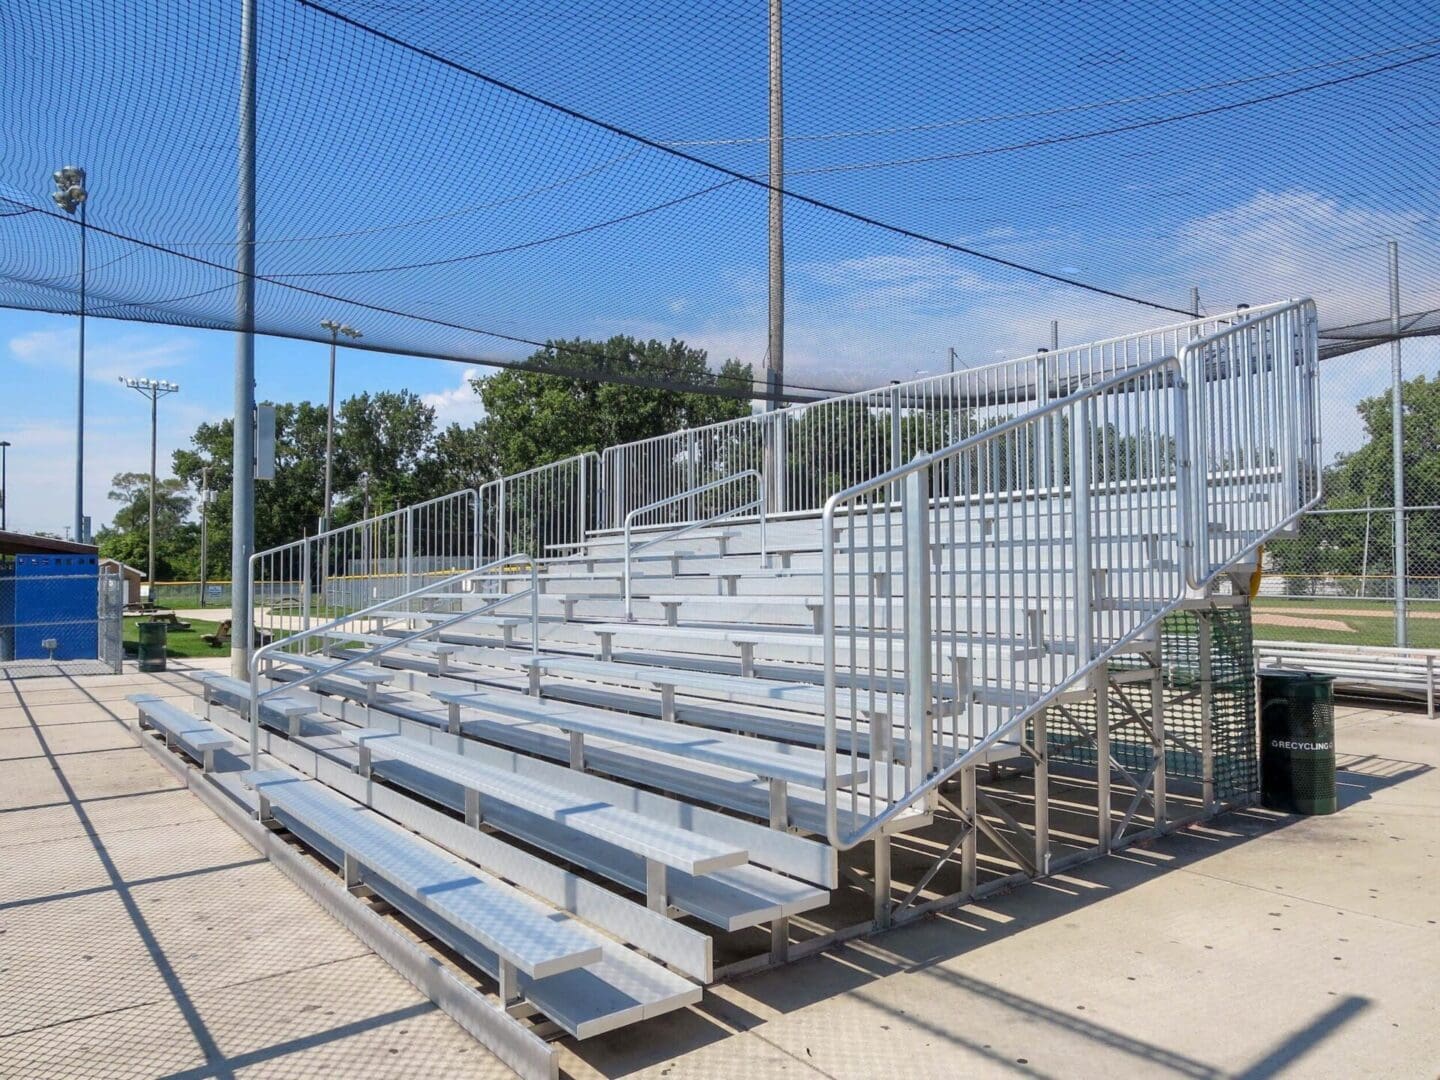 A bleacher with metal rails and seats.